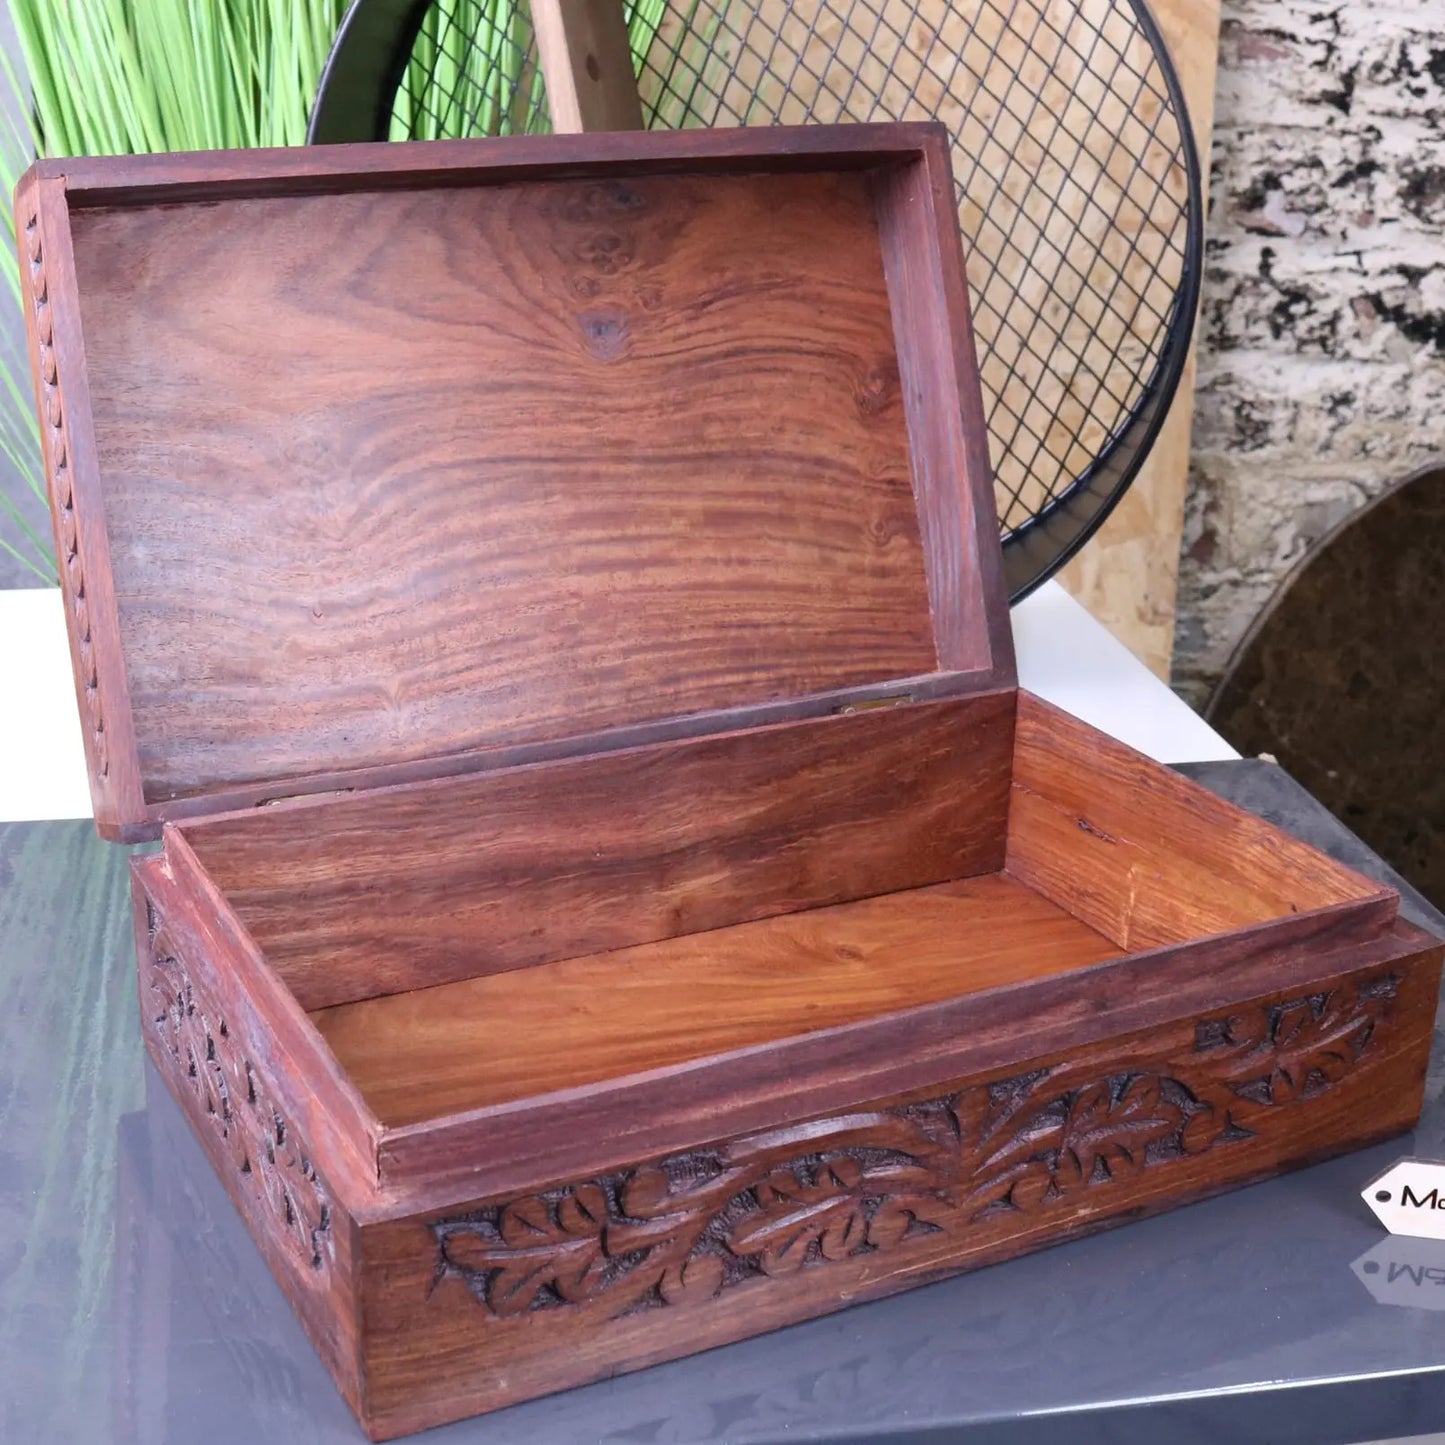 Zopui Large Carved Storage Box - Opened Box